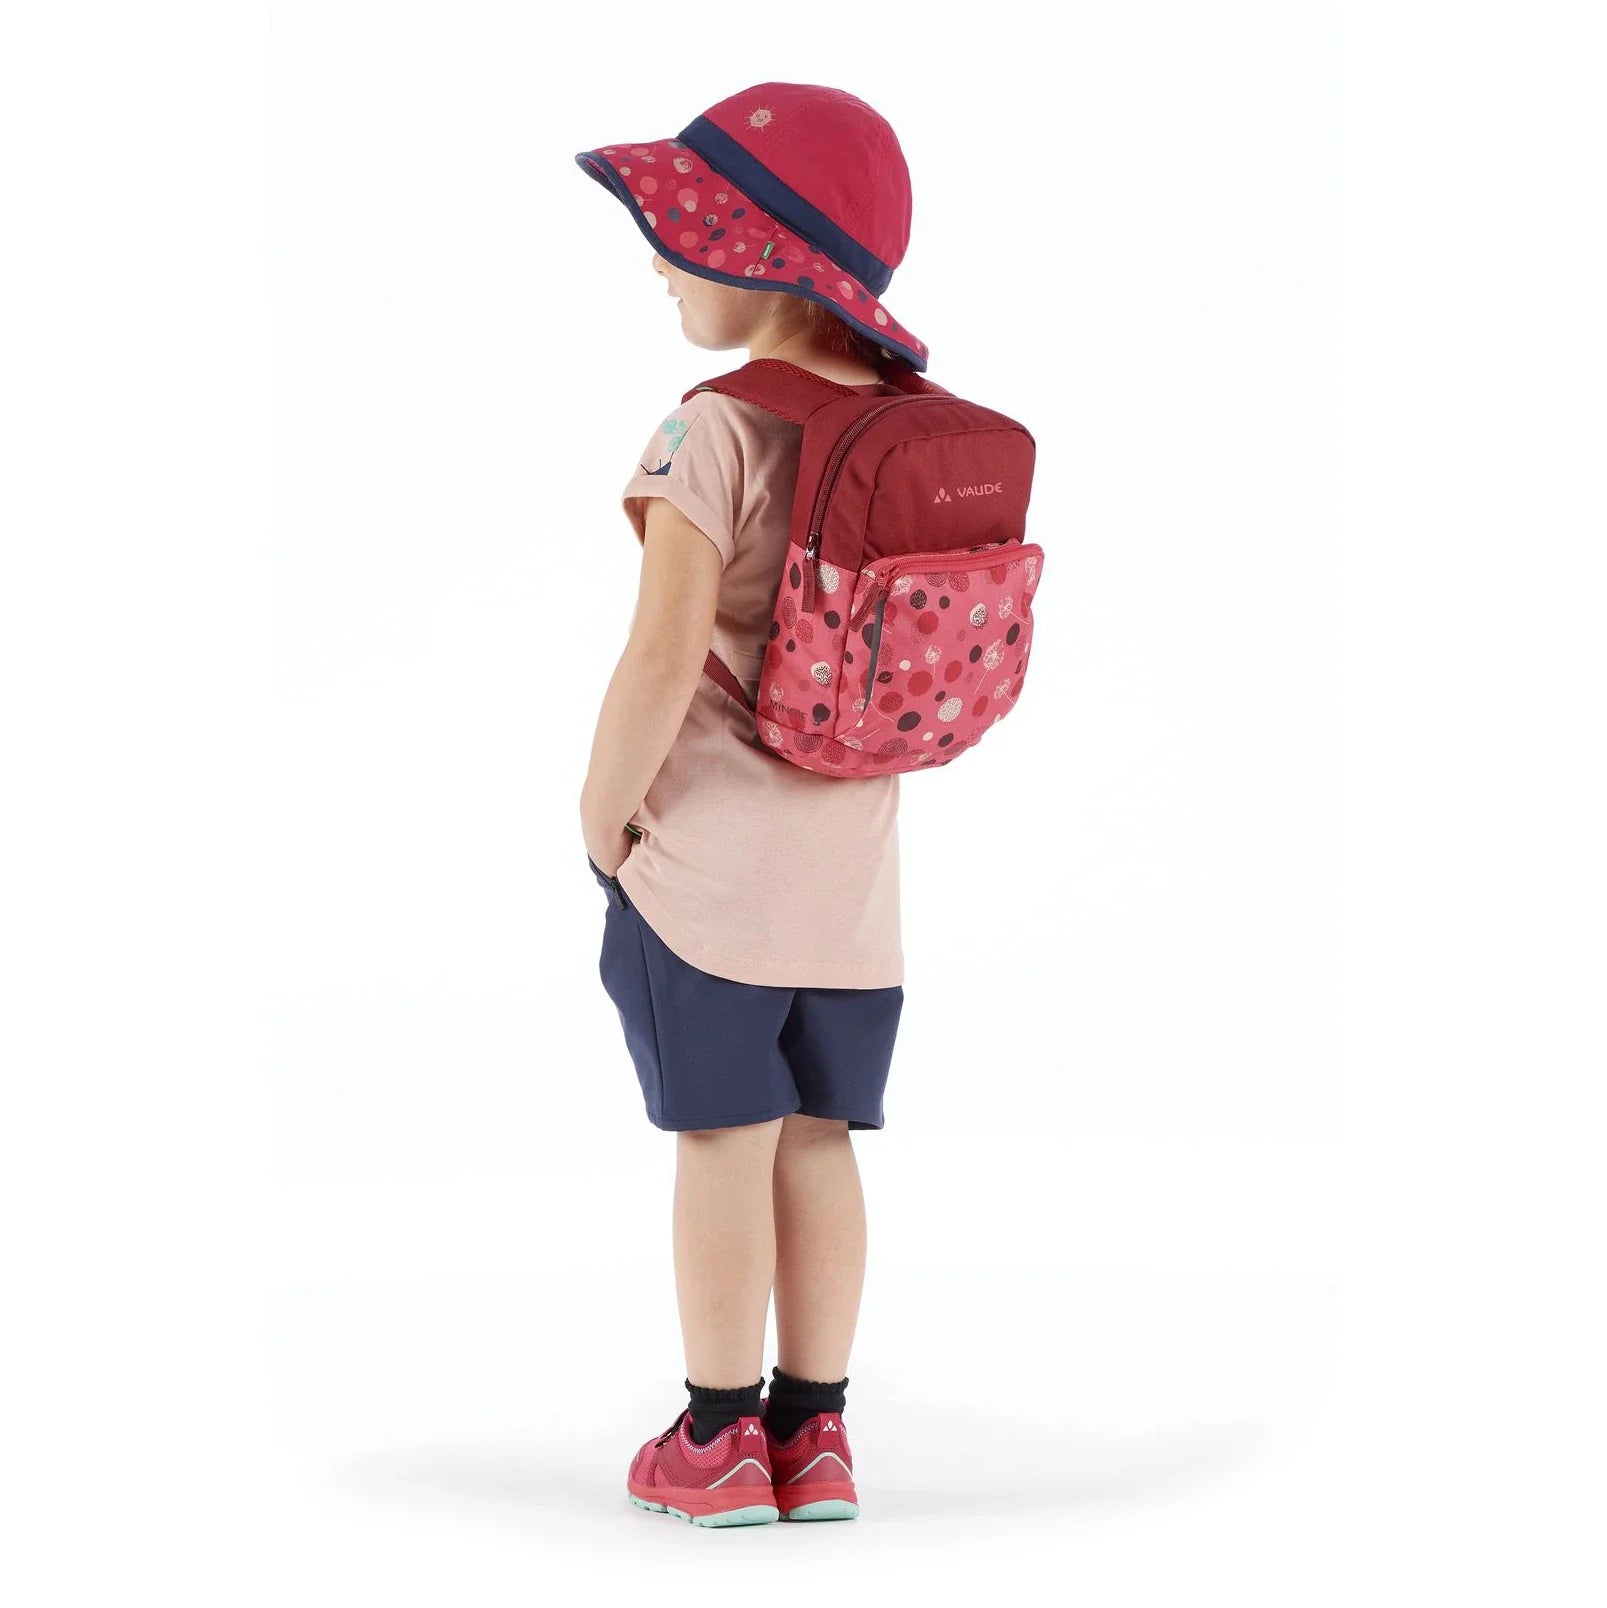 Vaude Family Minnie 5 children's backpack 26 cm - bright pink-cranberry